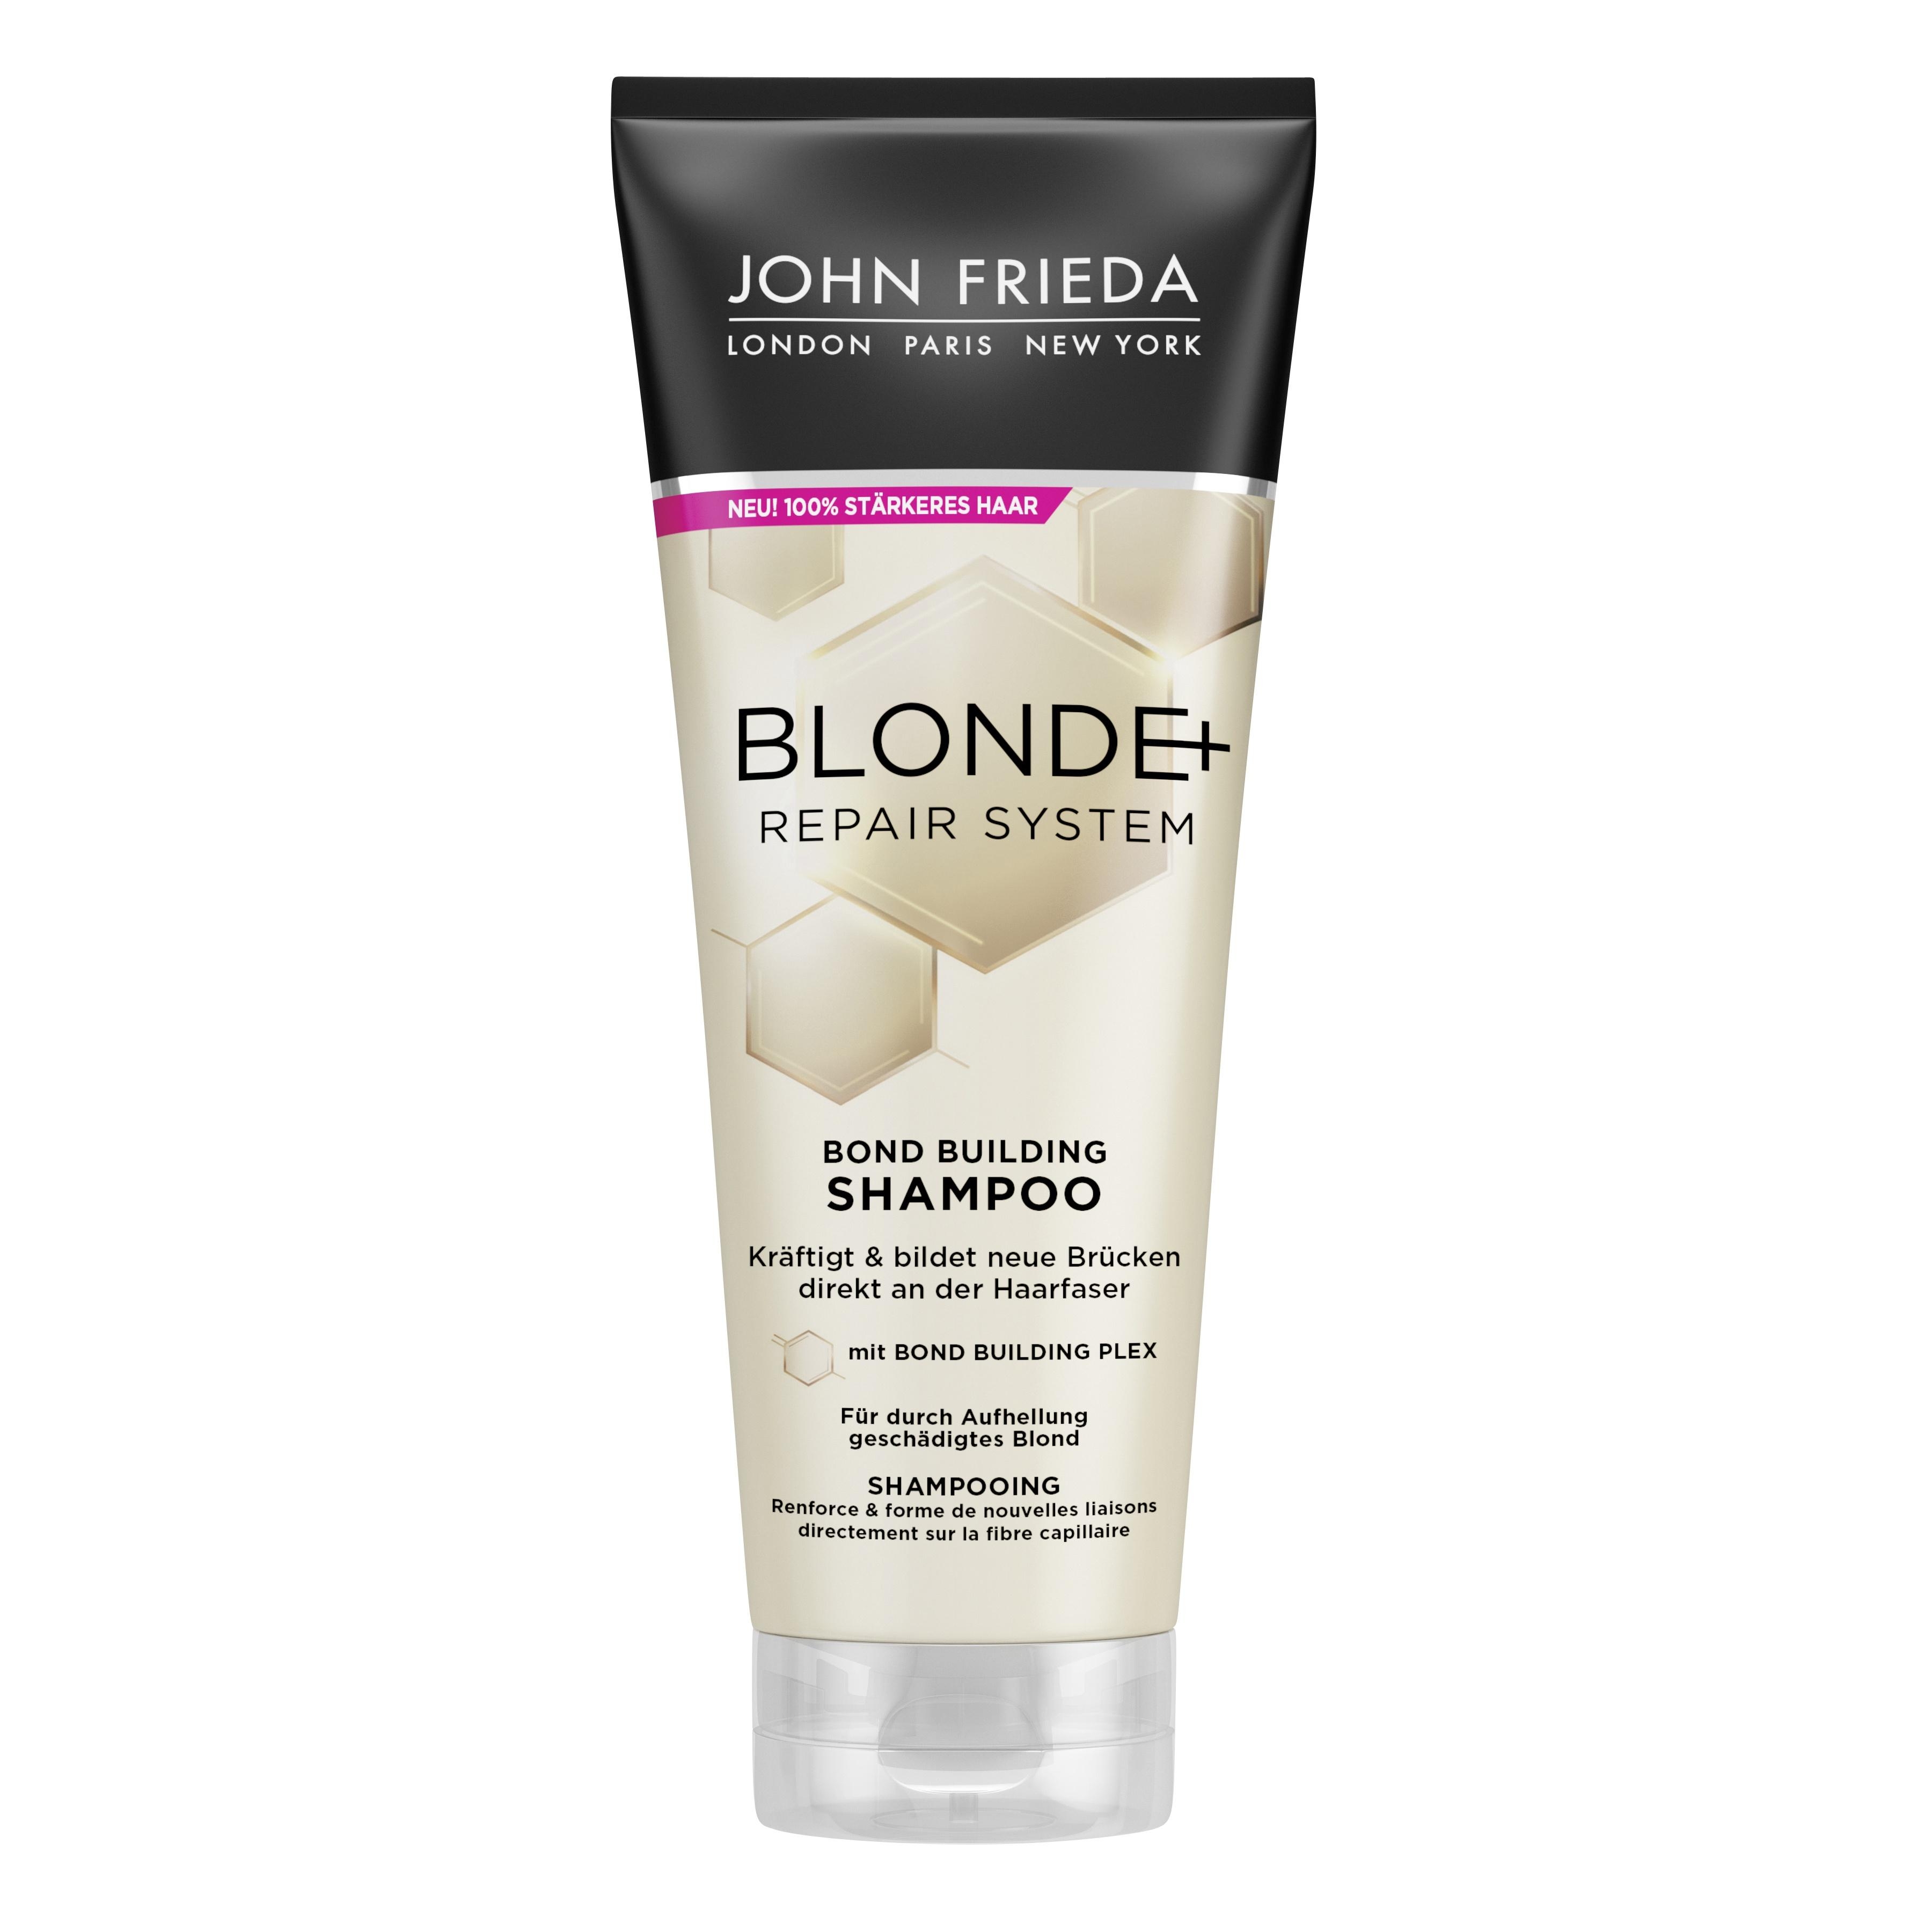 Product image from Blonde+ Repair System - Blonde+ Bond Builiding Shampoo